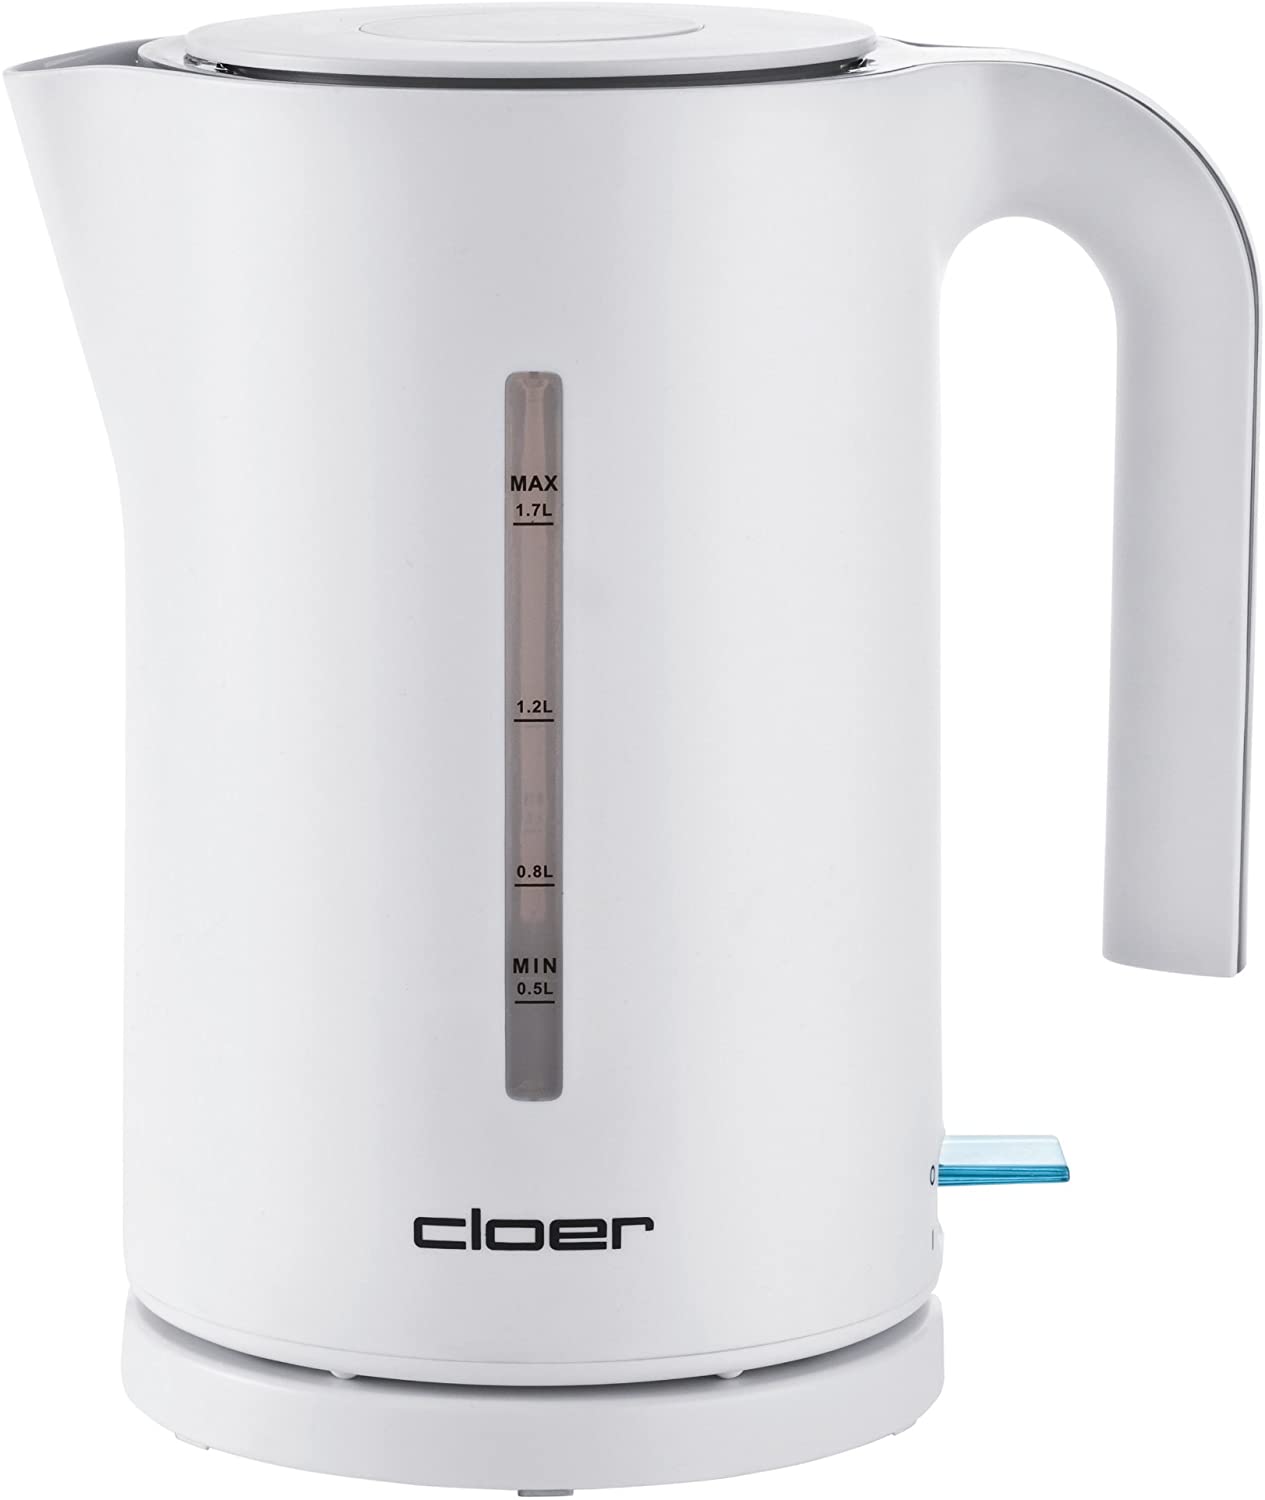 Cloer 4110 Kettle / 2200 W / Large Water Level Indicator / Boil Dry and Overheating Protection / 1.7 Litres / Black